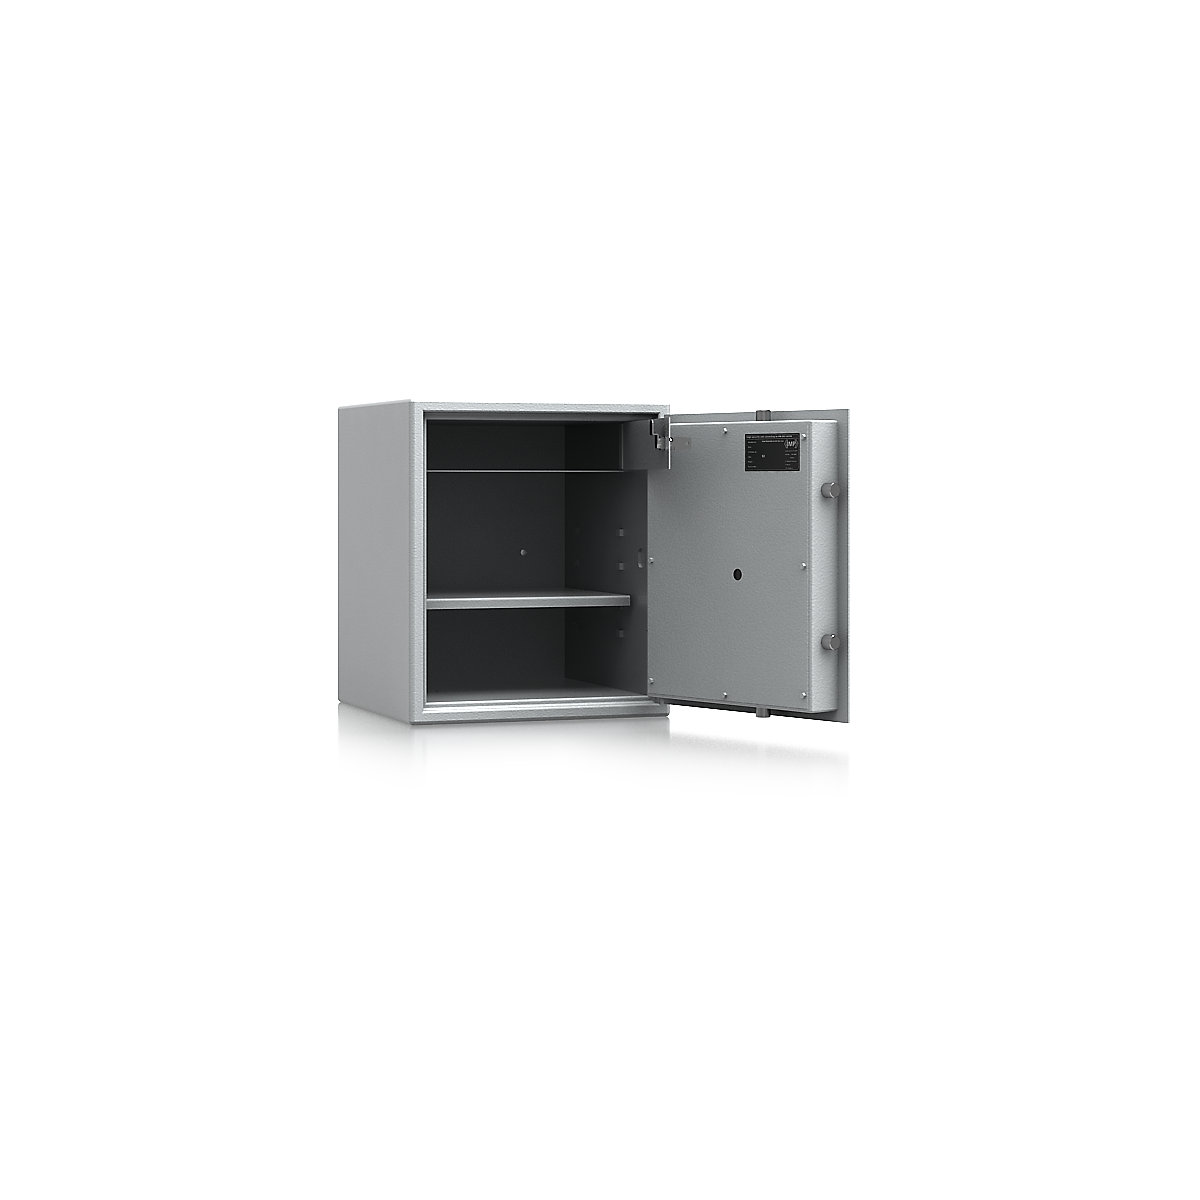 Built-in furniture safe with interior safe, VDMA B, S2, HxWxD 457 x 395 x 382 mm-8